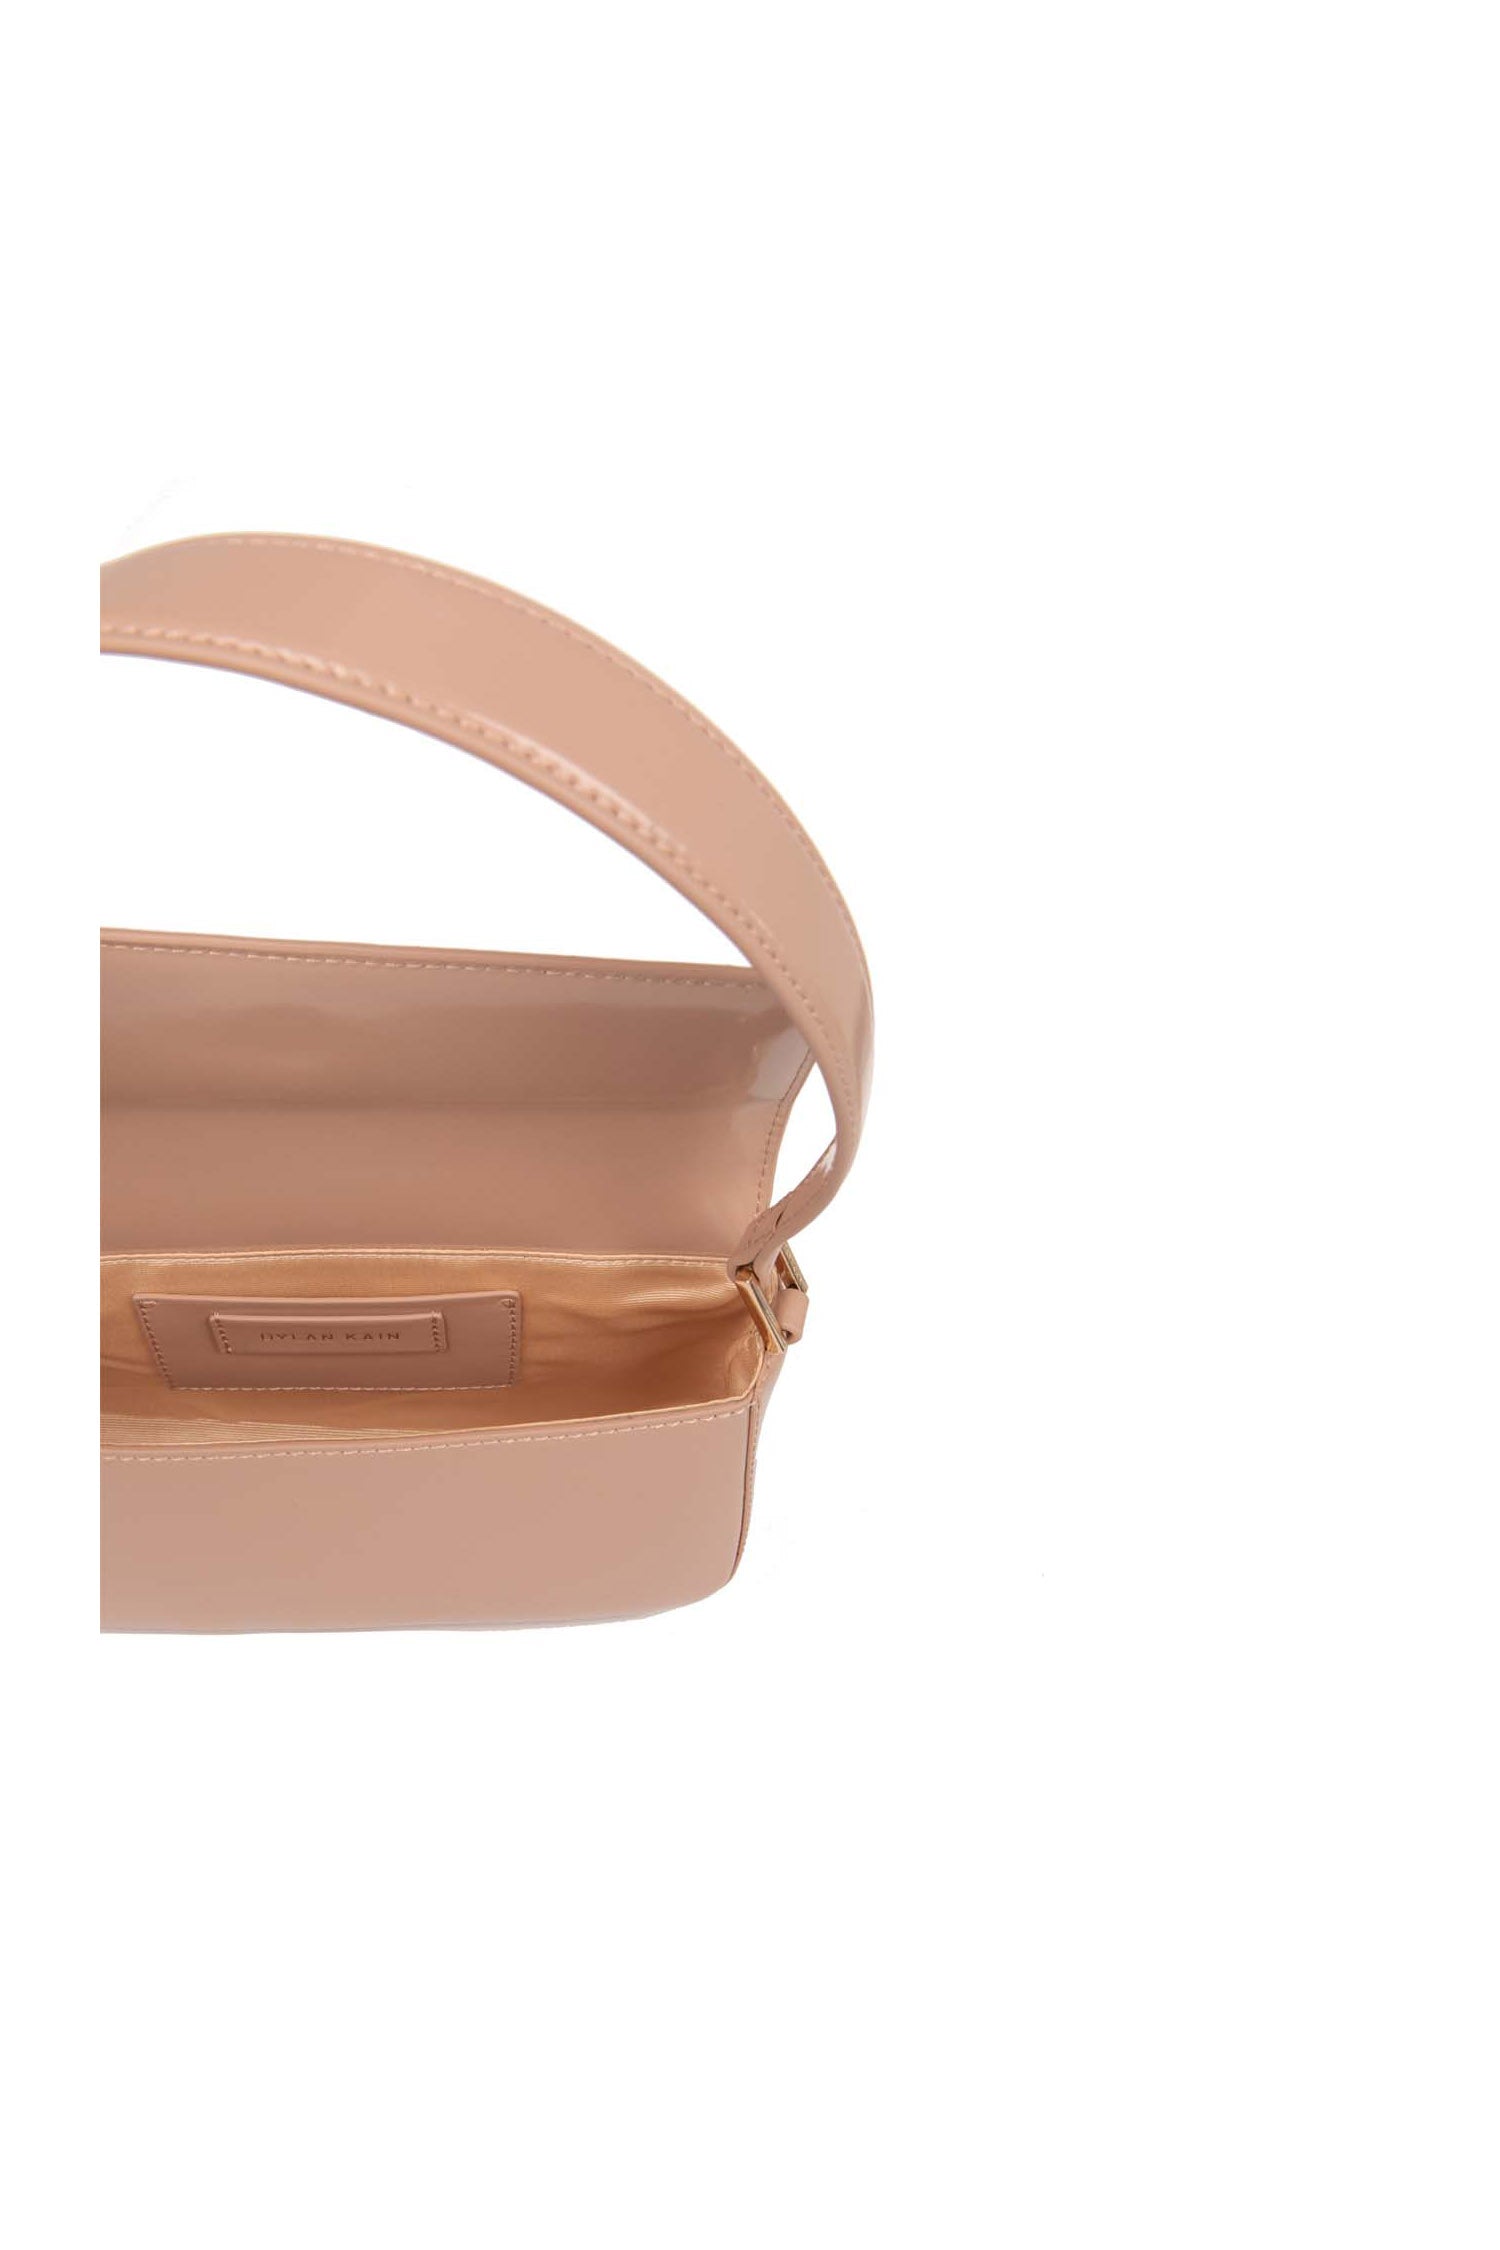 The Baguette Patent Bag Fawn Light Gold